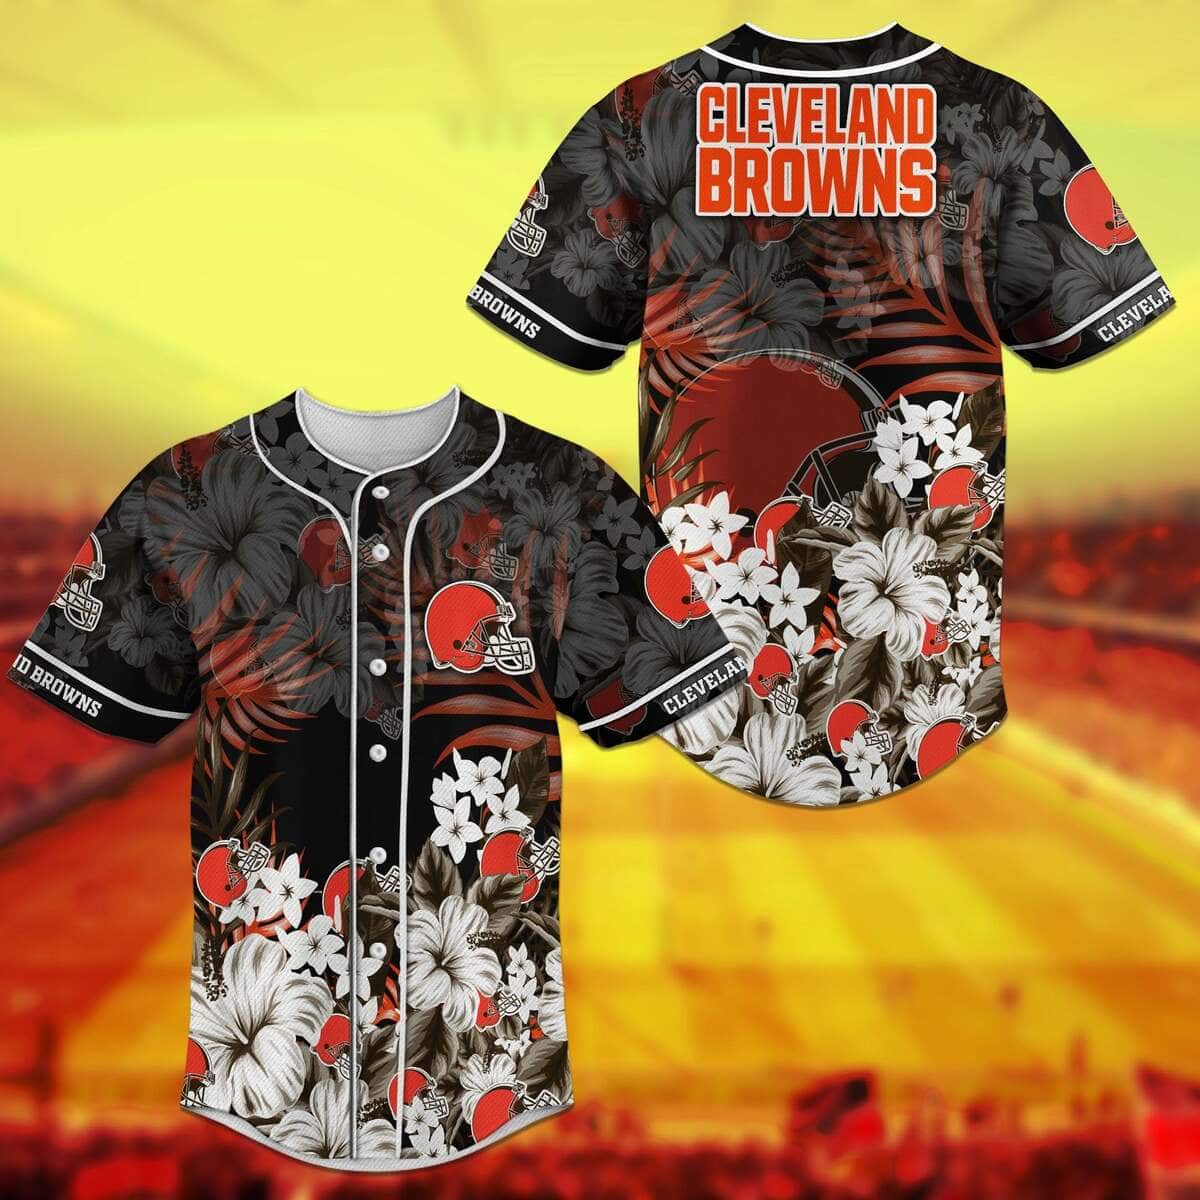 Aloha NFL Cleveland Browns Baseball Jersey Tropical Flower Gift For Friends